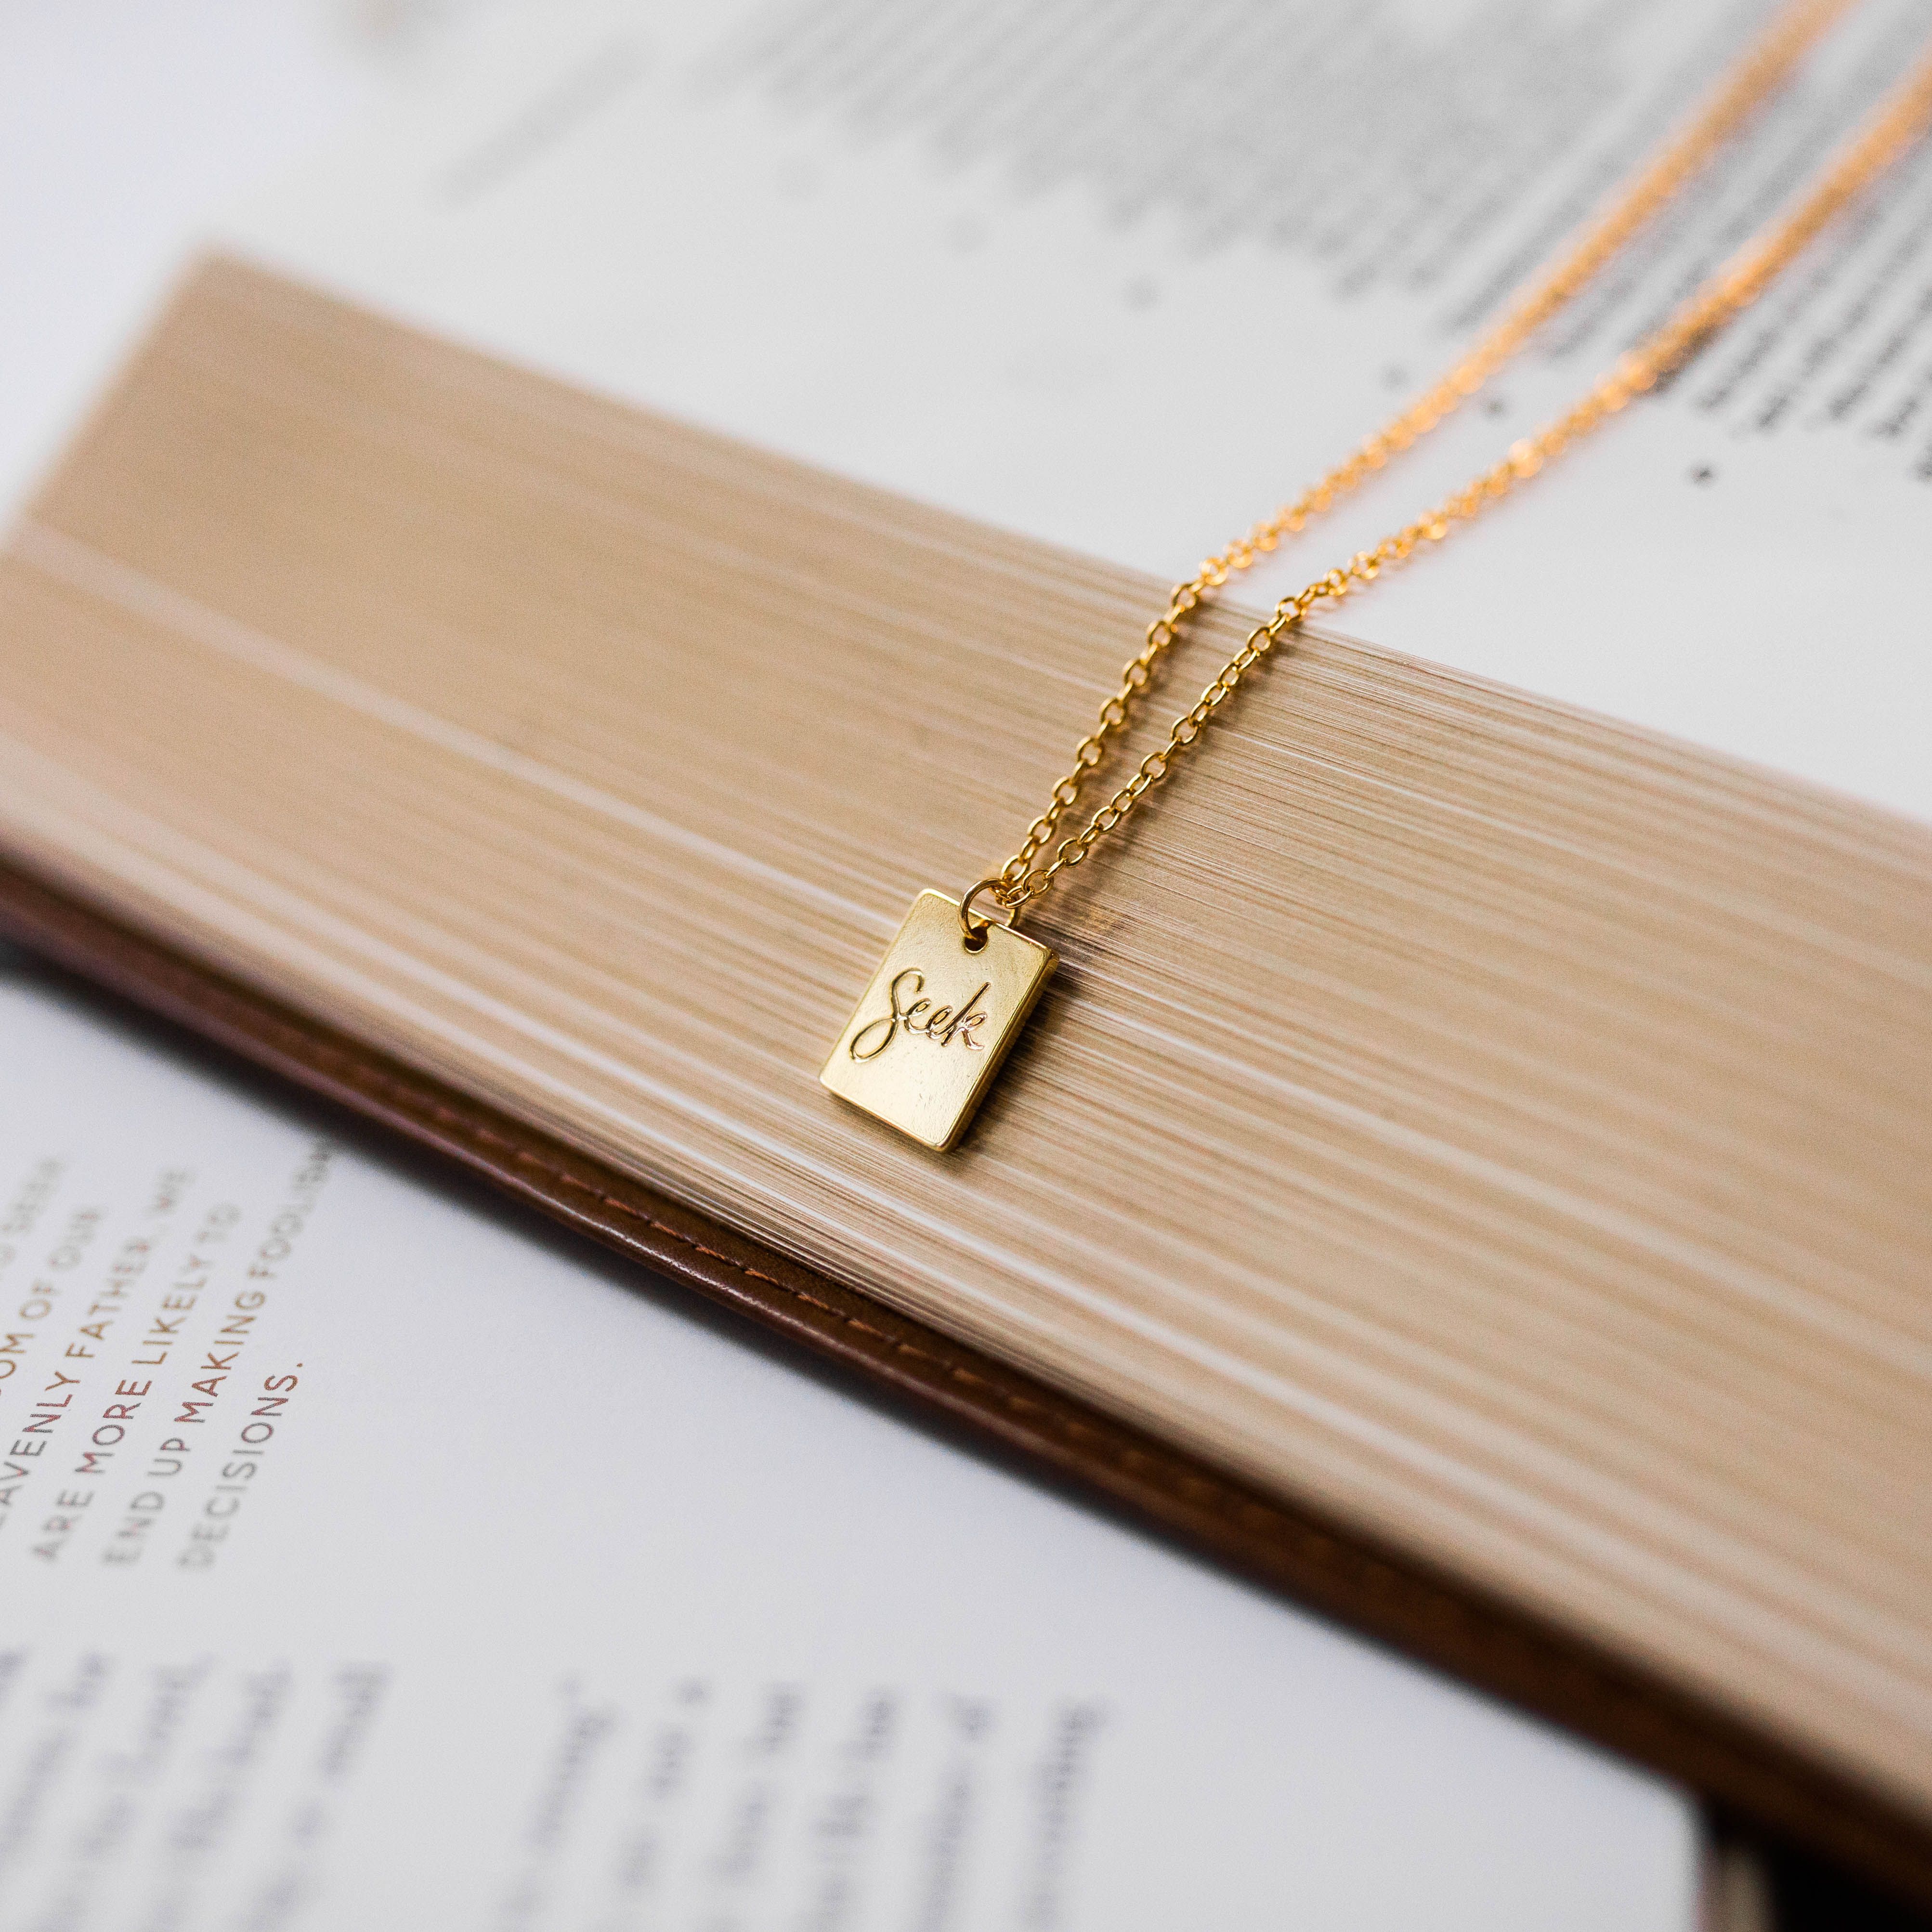 Seek Necklace | The Daily Grace Co.